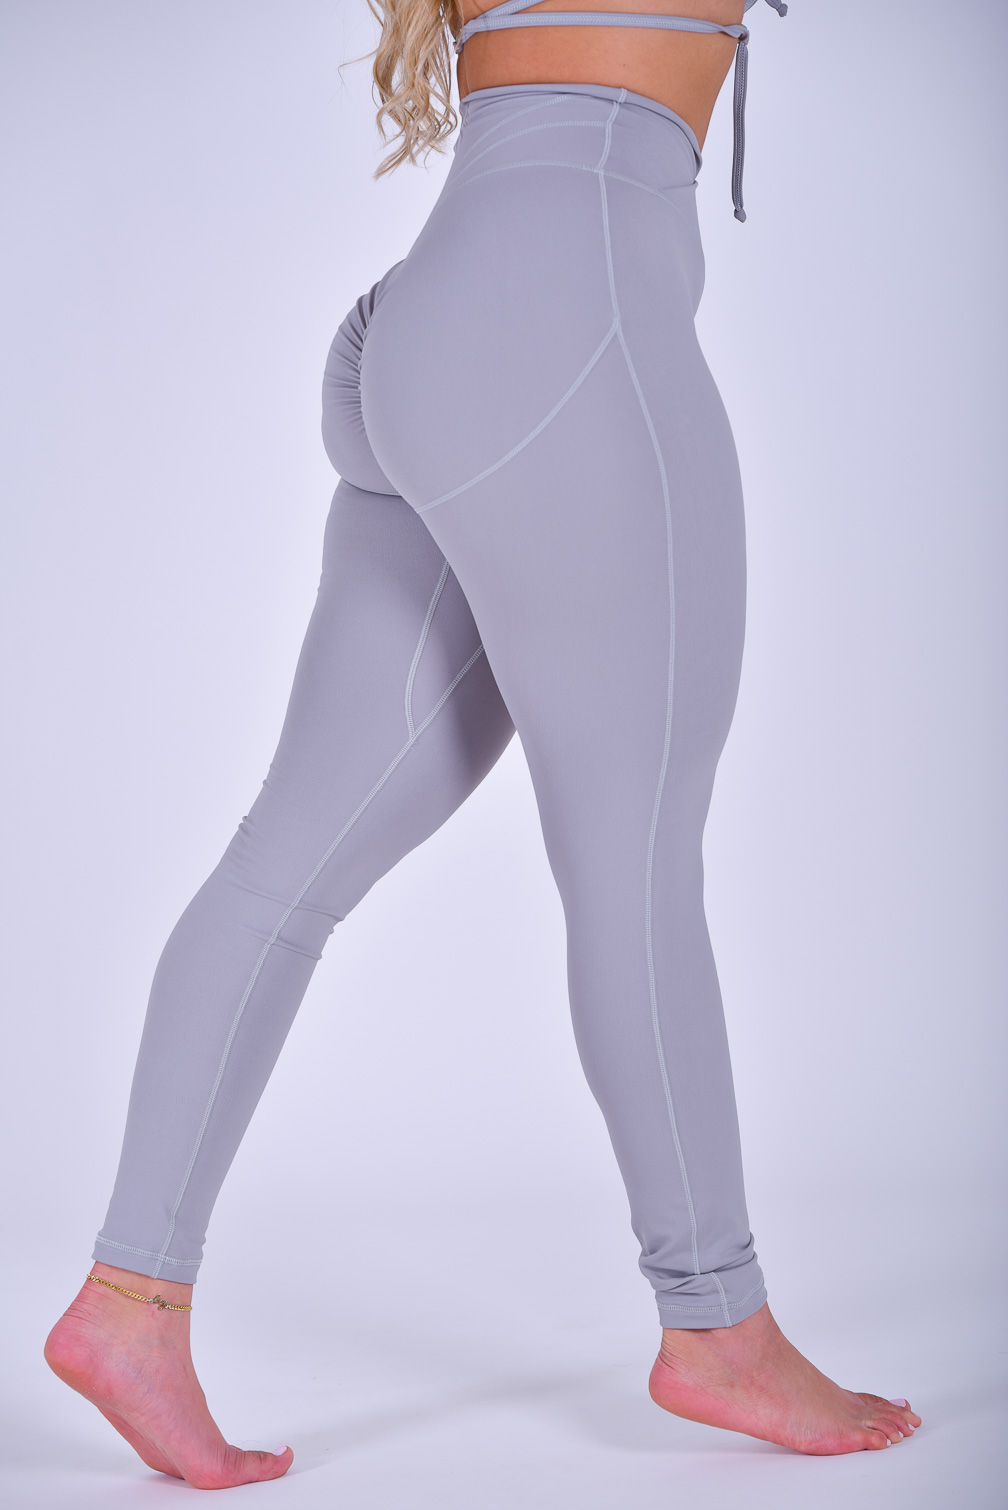 Up Classic Scrunch Leggings Additional Colors (Custom-Made) – CLS Sportswear